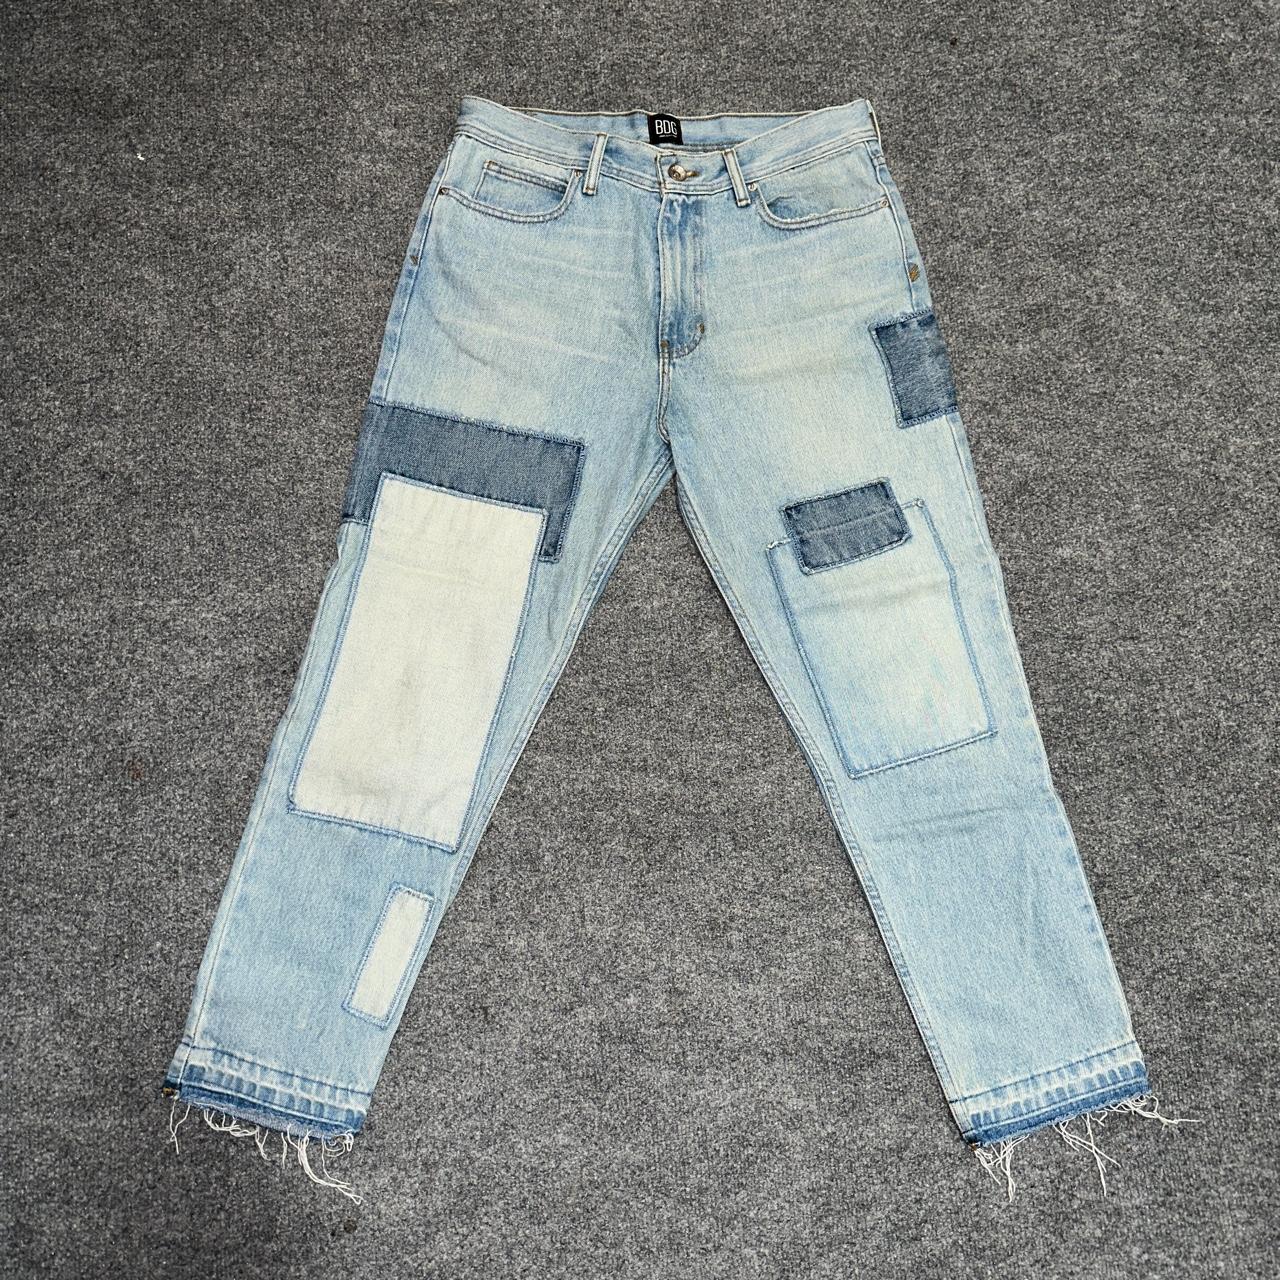 Urban Outfitters Men's Jeans